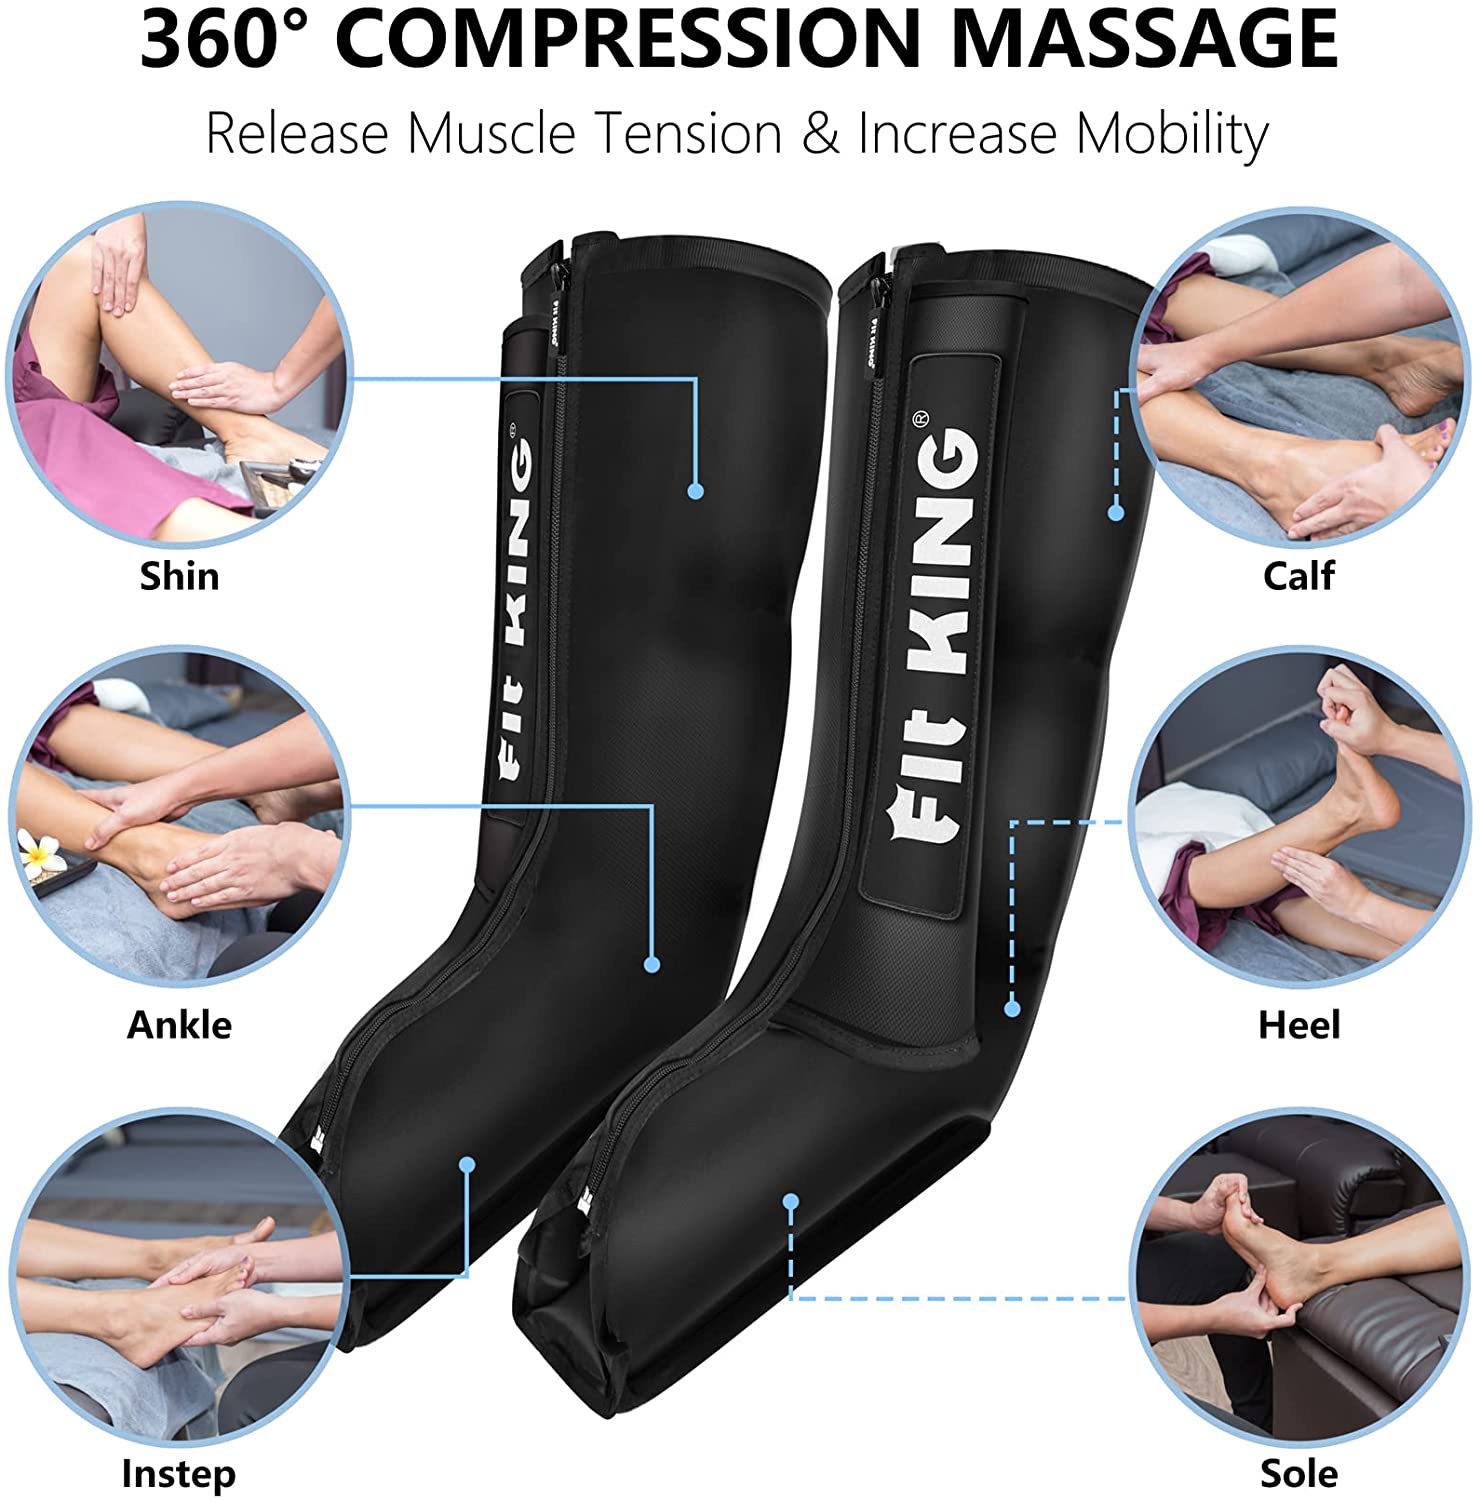 FIT KING Dynamic Leg Compression Boots | FT-068A